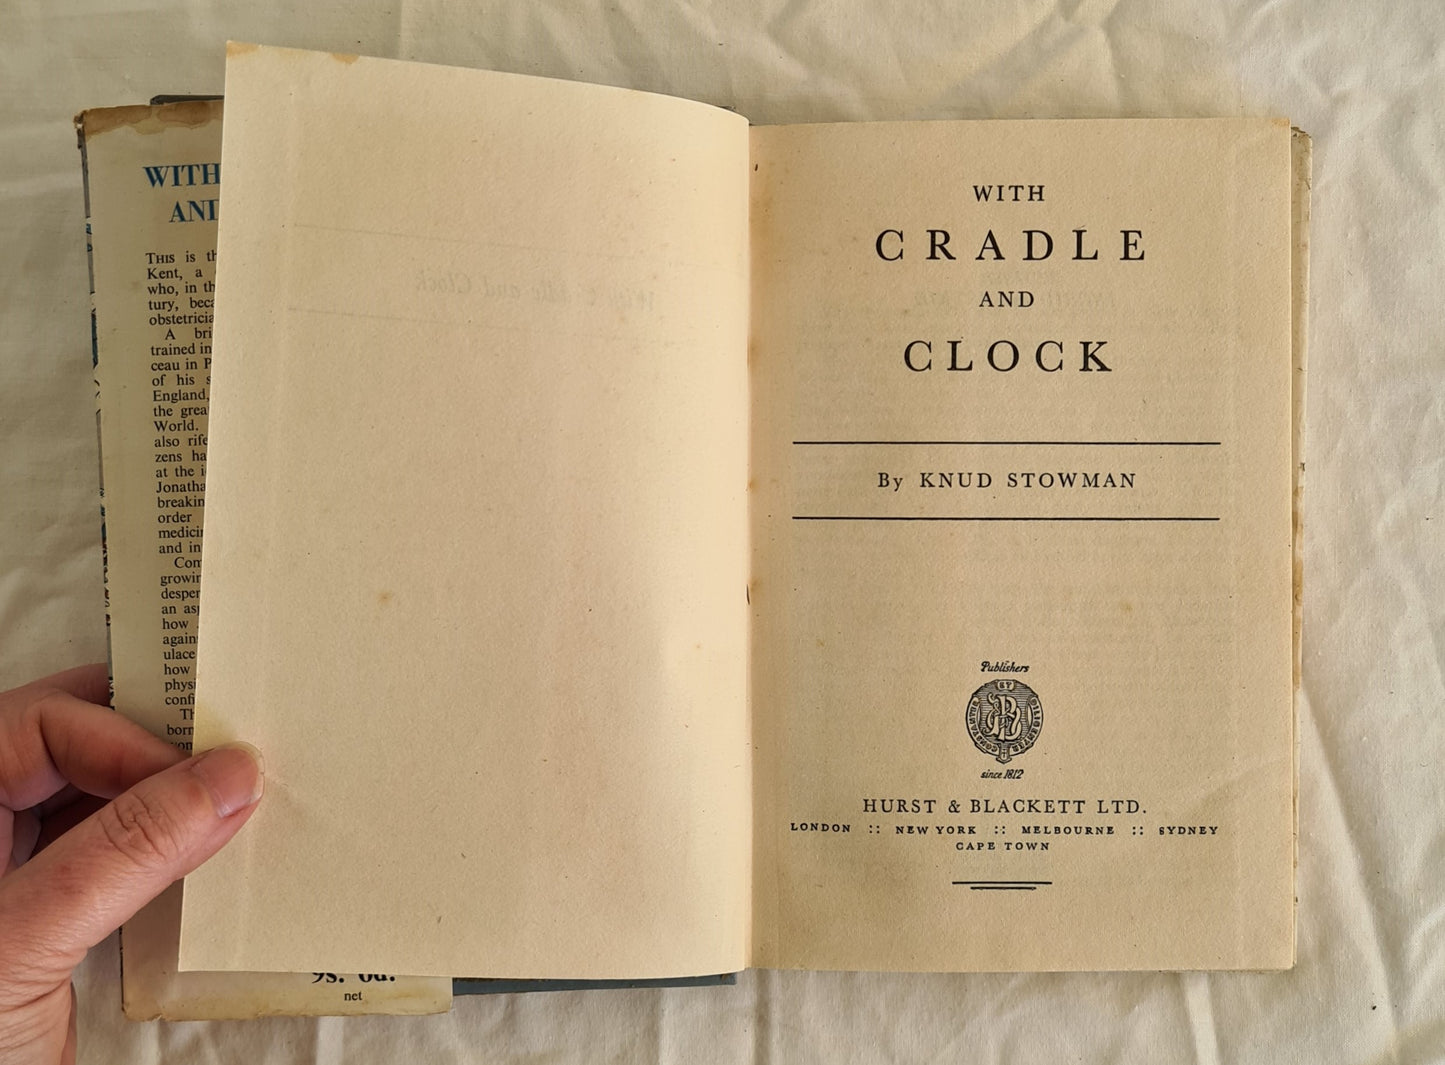 With Cradle and Clock by Knud Stowman